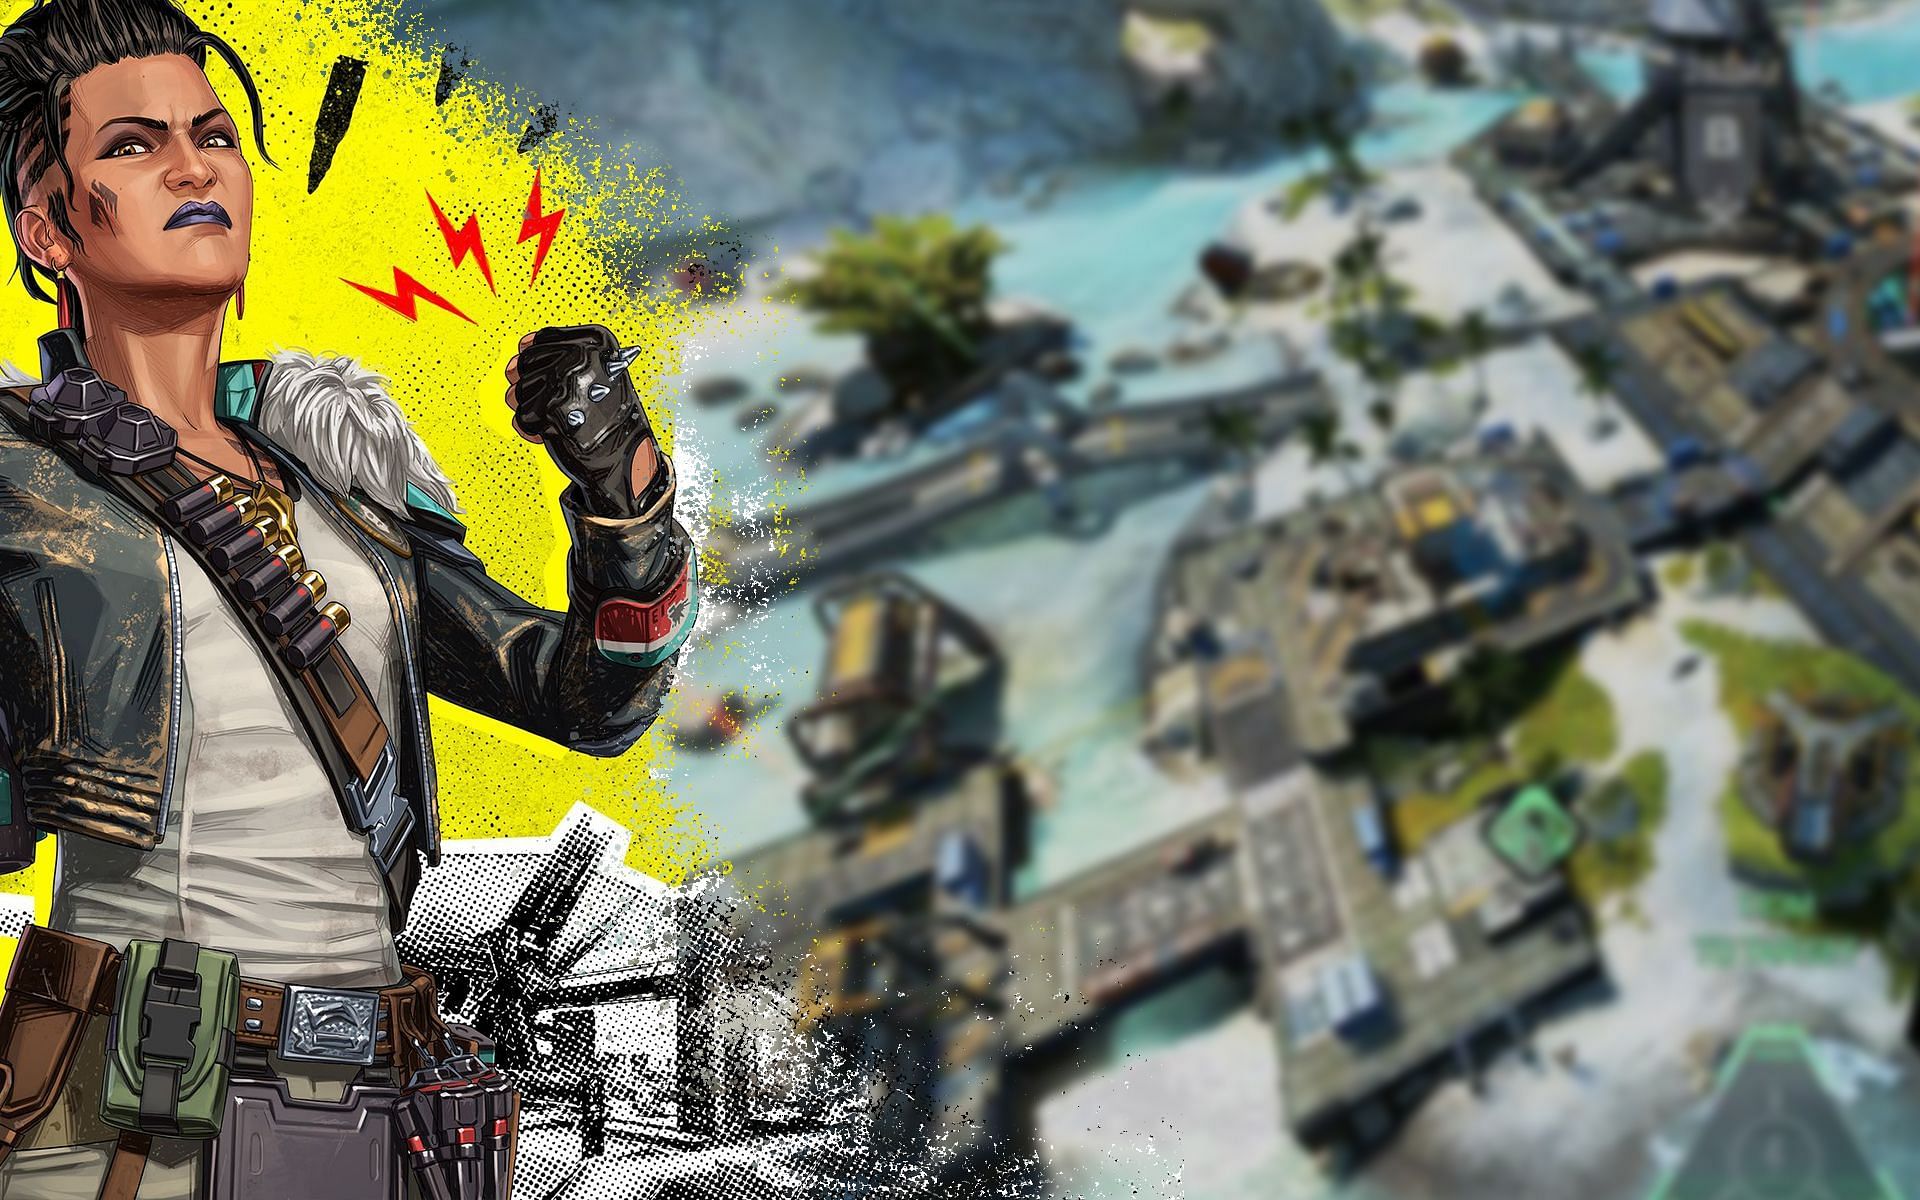 Everything to know about Control in Apex Legends Season 12 (Image by Sportskeeda)